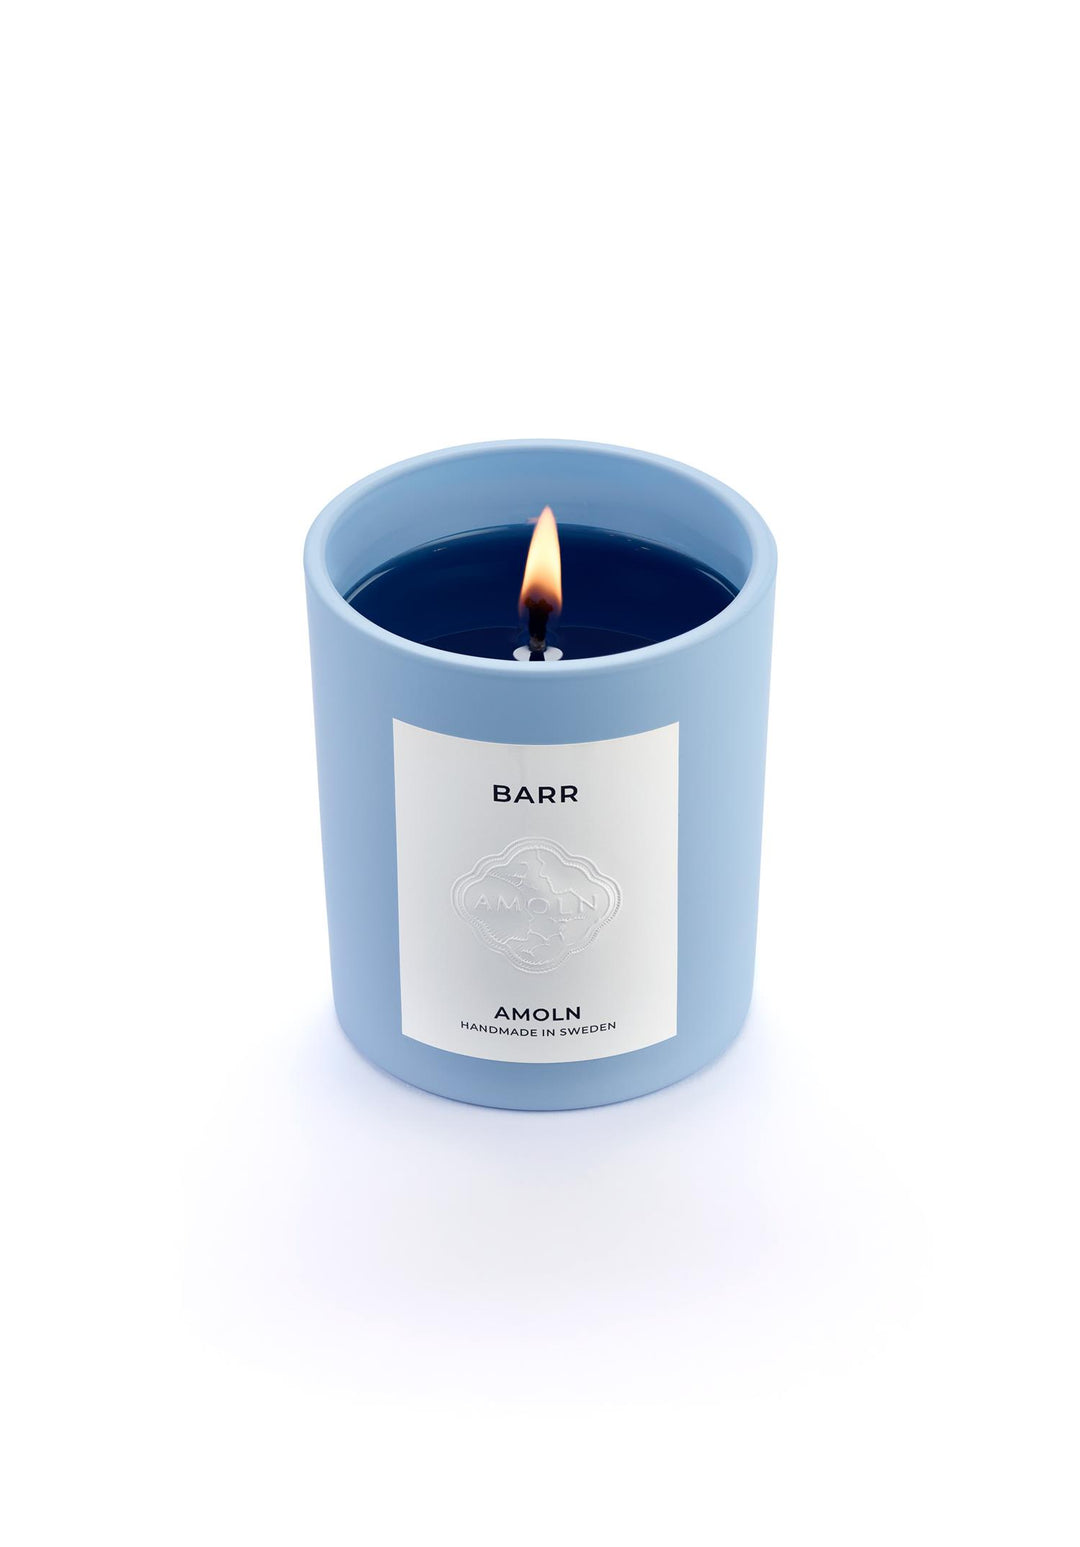 CANDLE BARR